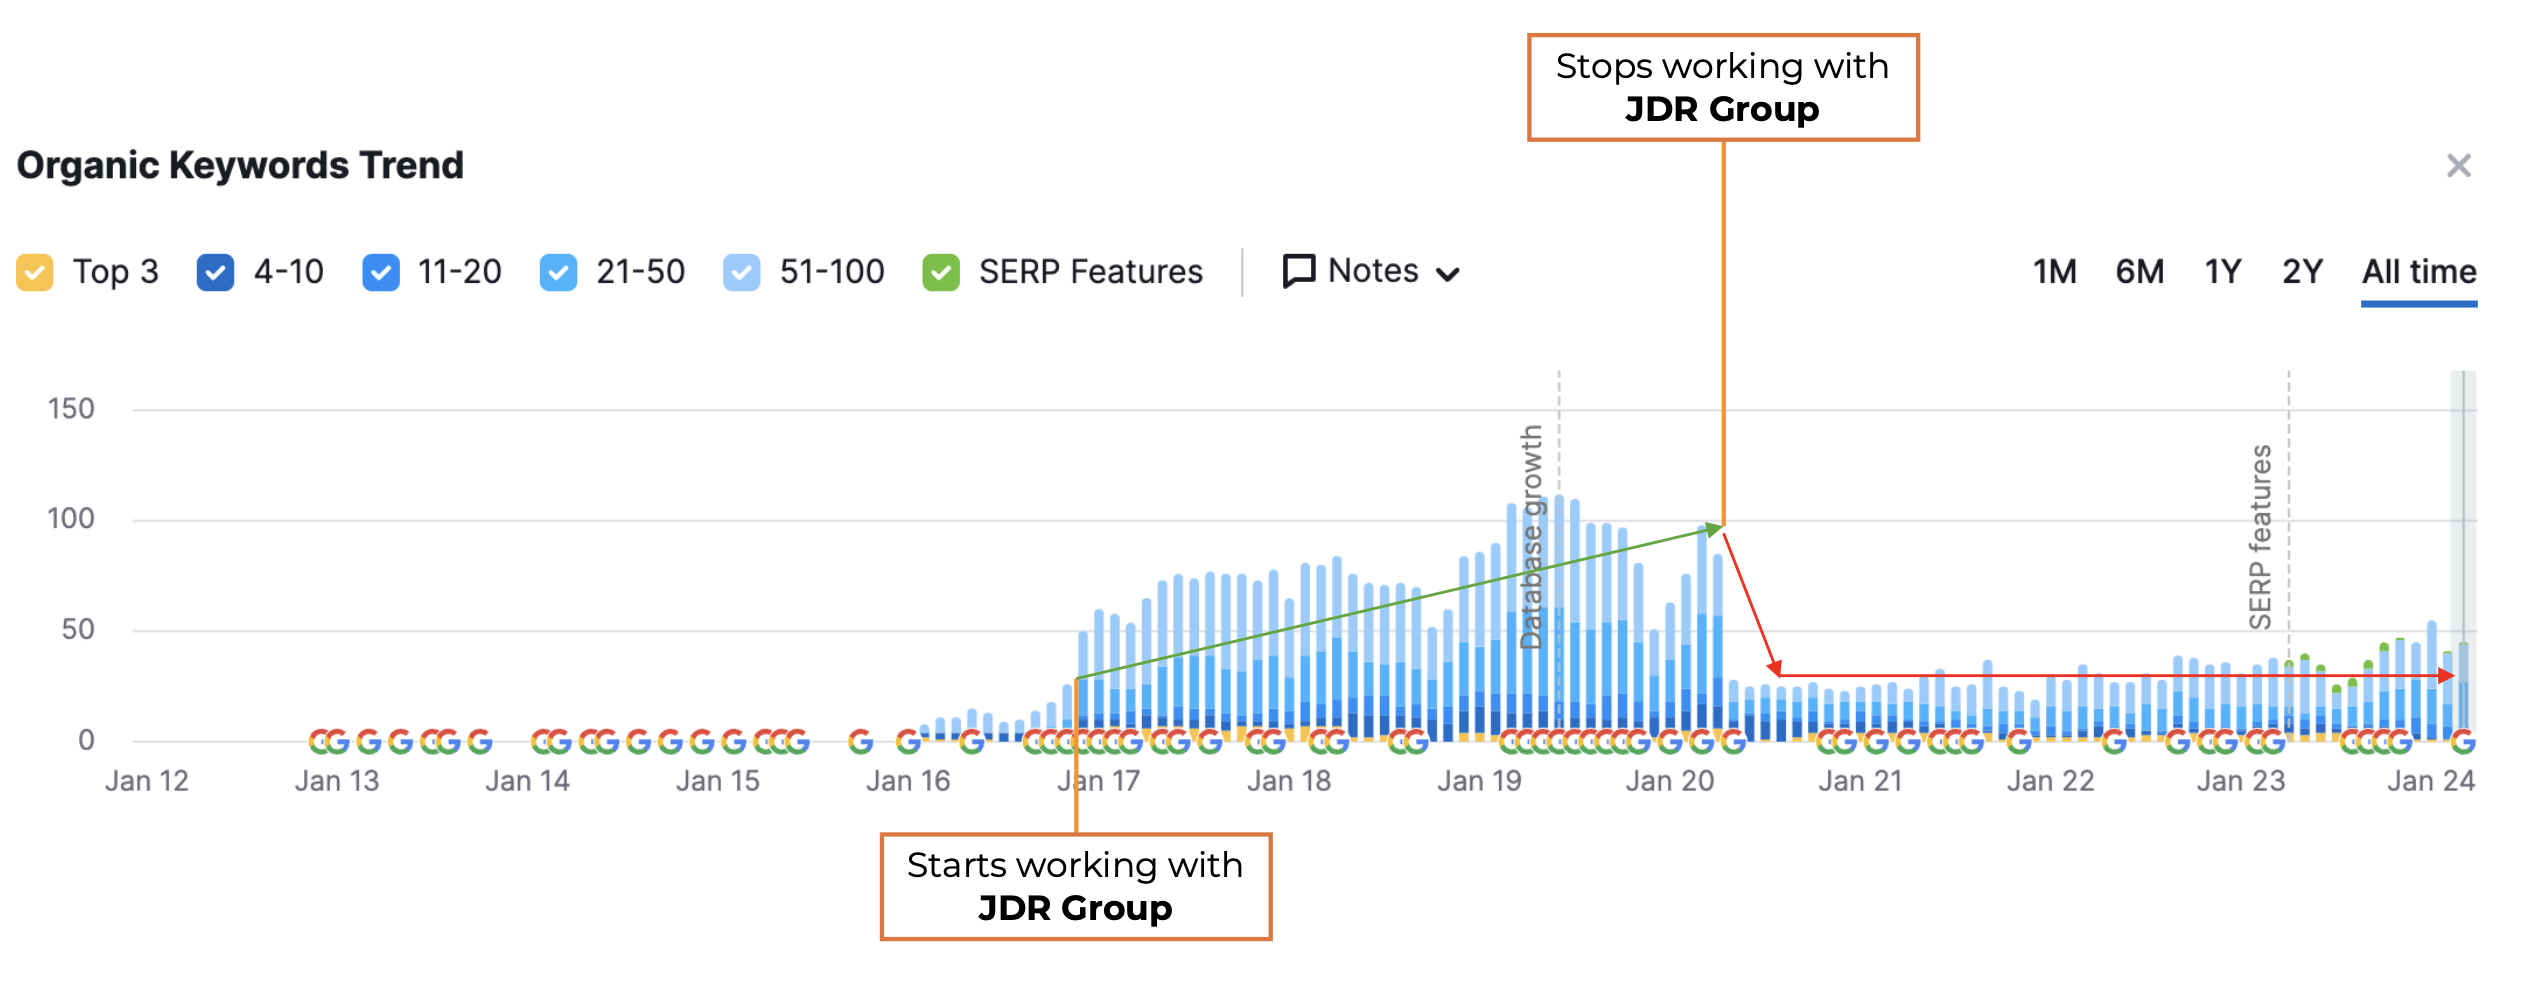 JDR Group Case Study - before and after stopping inbound marketing - 9